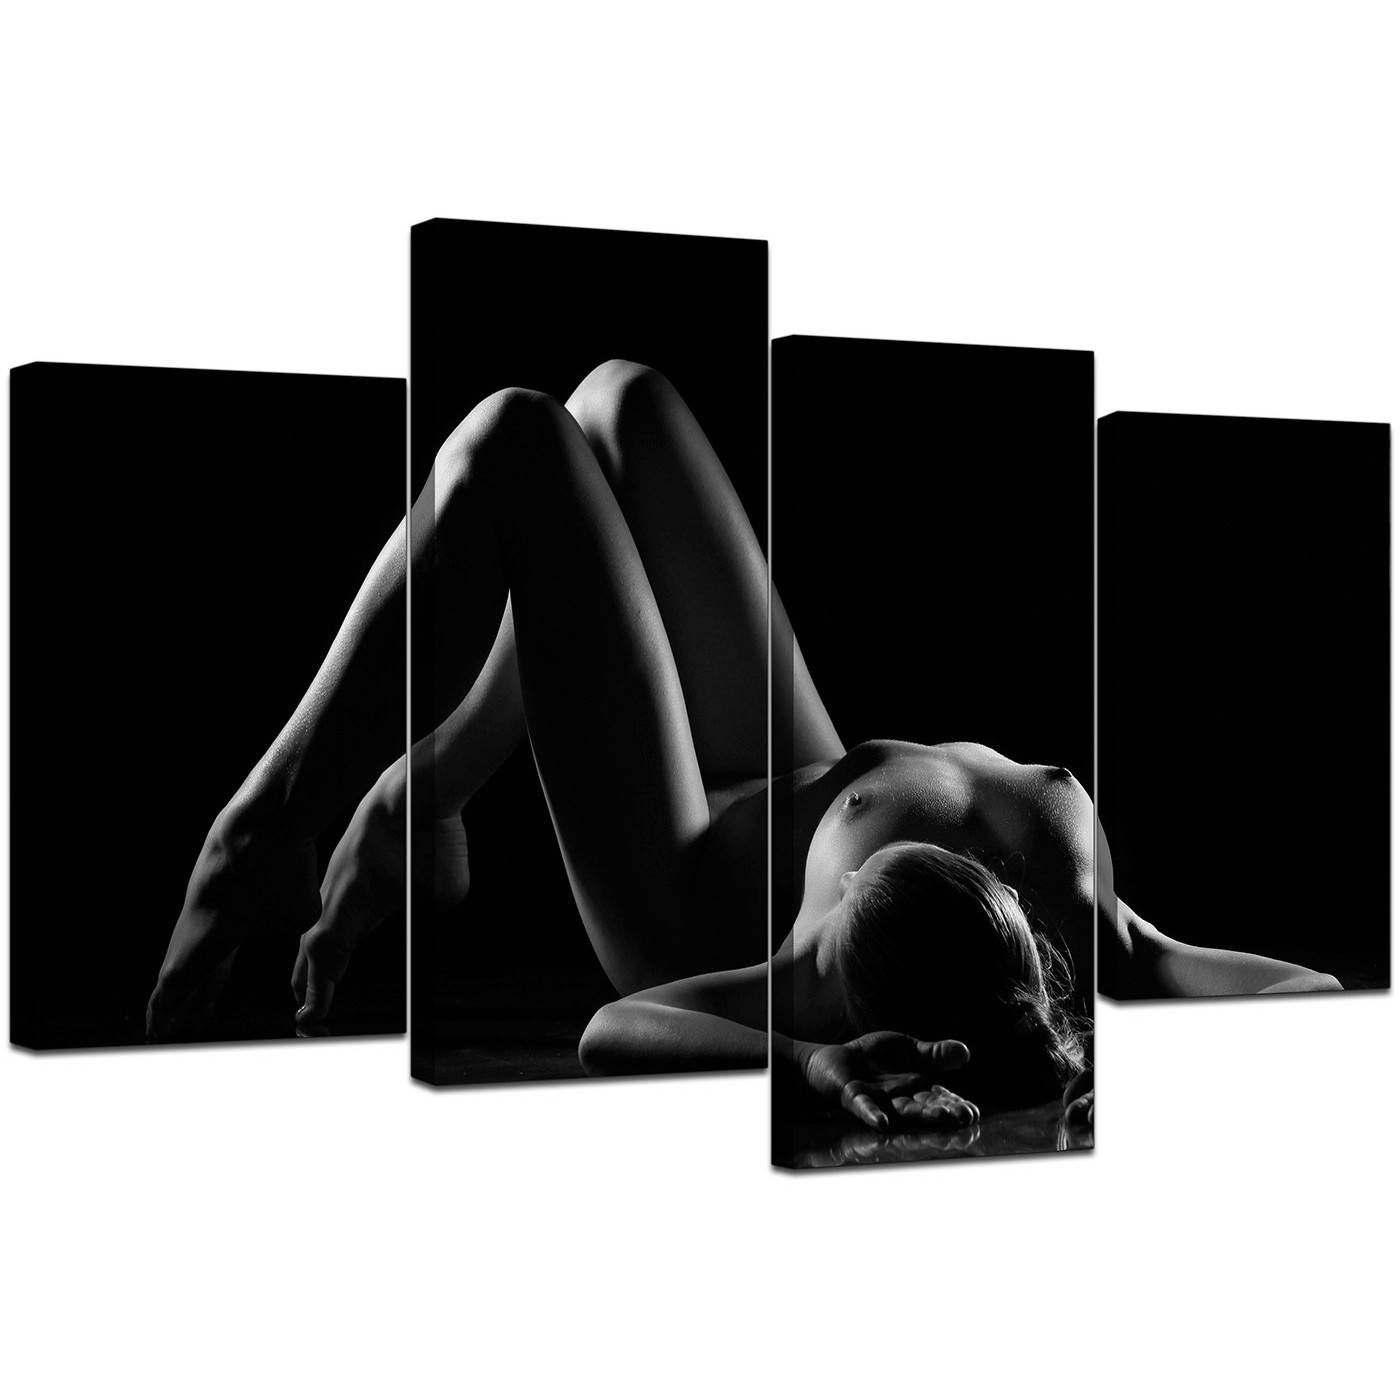 20 Best Ideas Of Cheap Black And White Wall Art Regarding Most Up To Date Black And White Photography Canvas Wall Art (View 4 of 15)